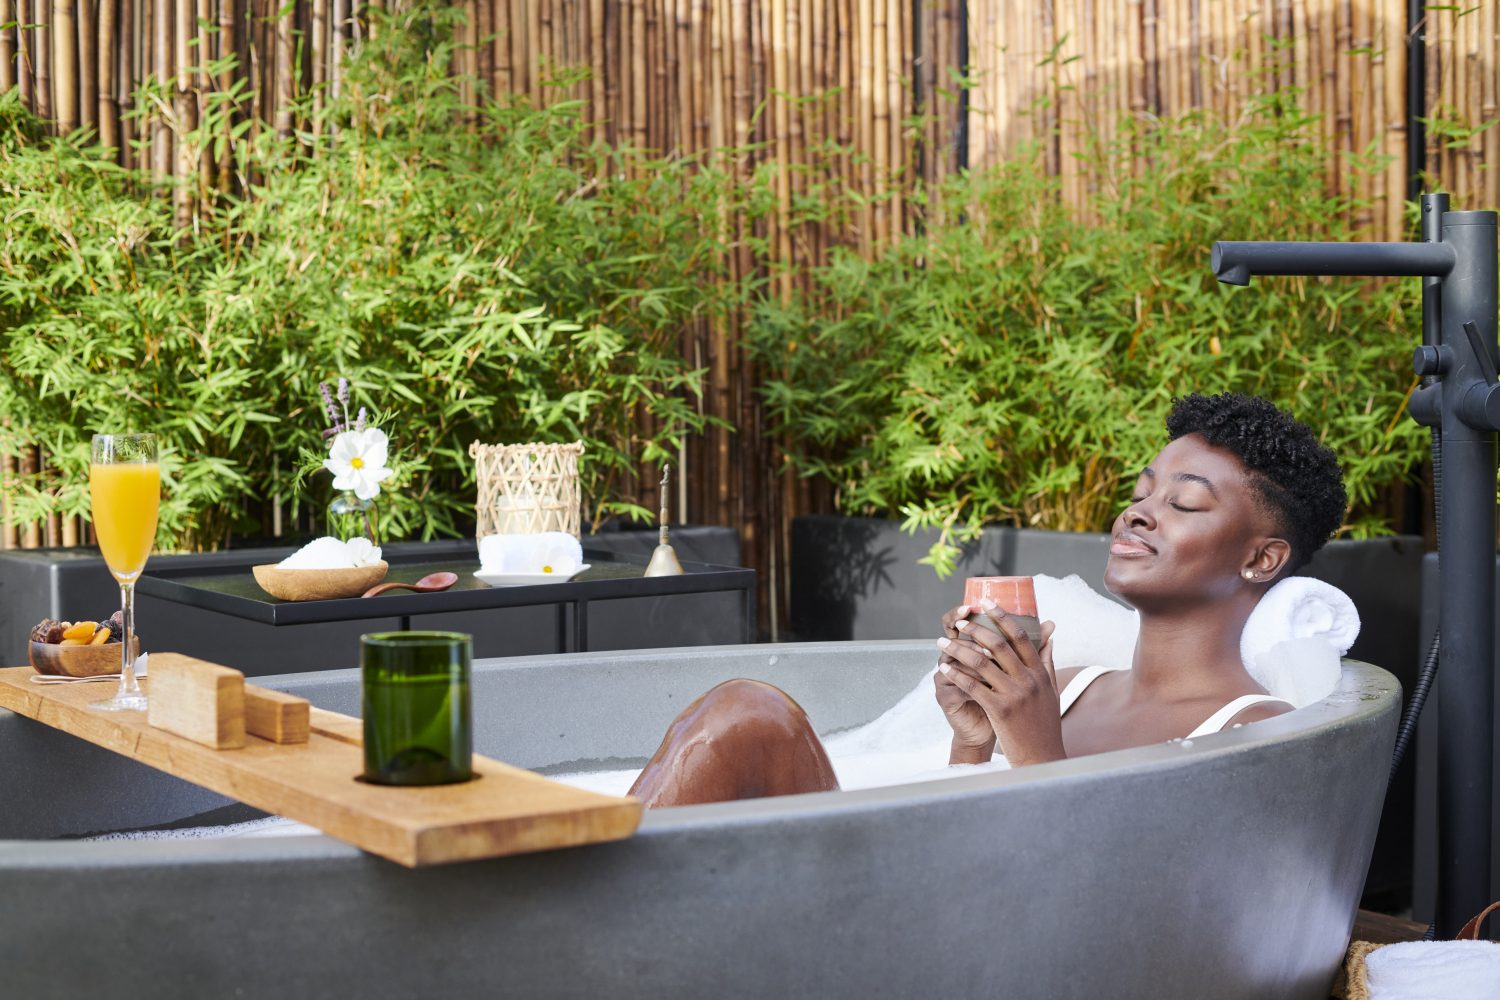 woman in bath tub outdoors with products on a stand, plants behind her 